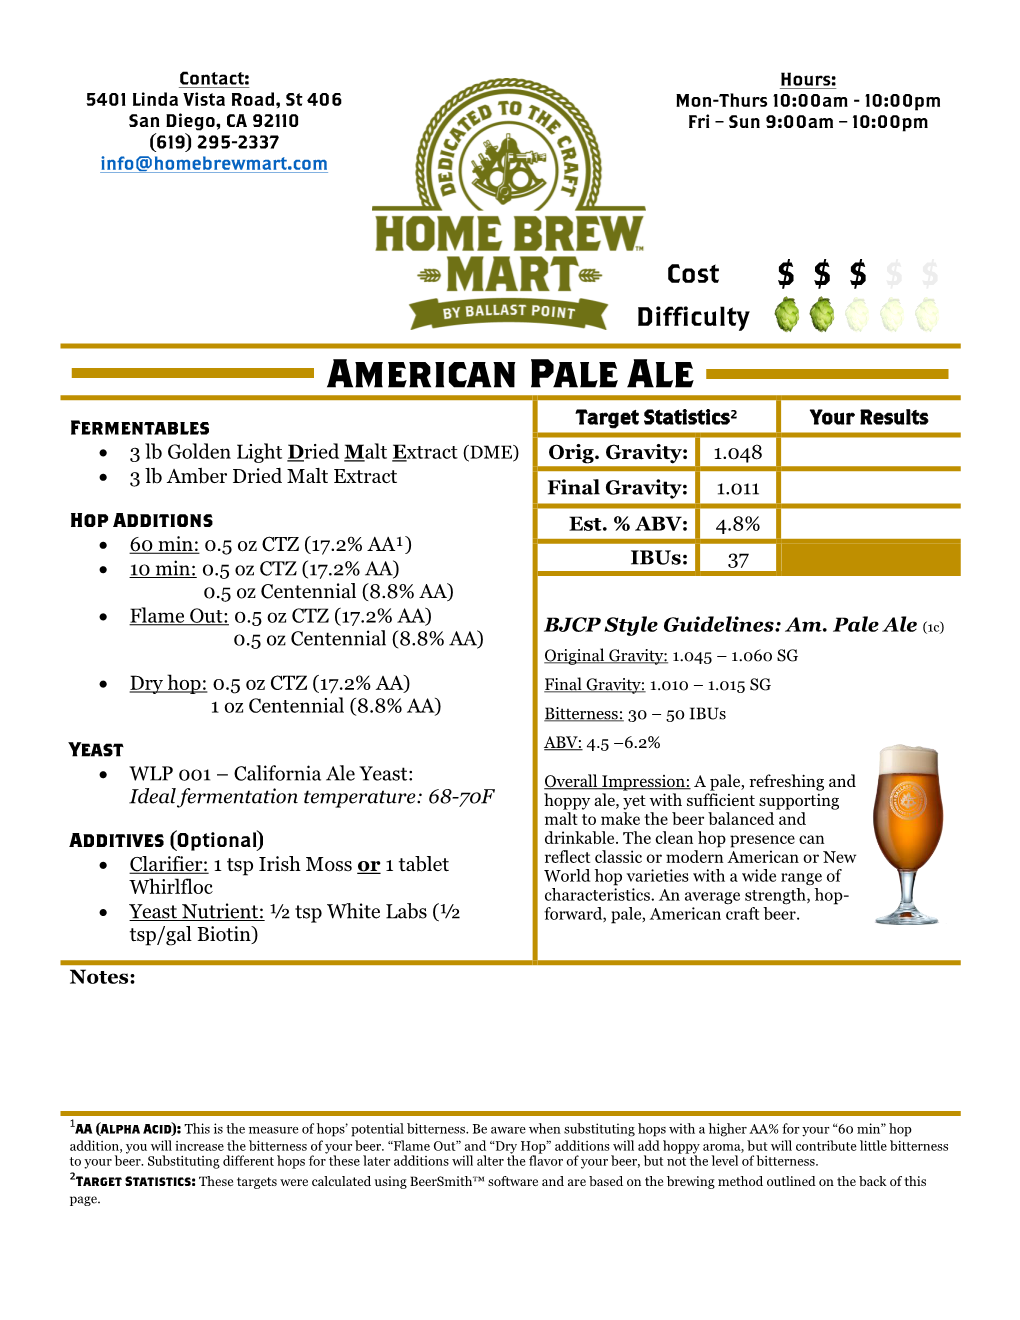 American Pale Ale Target Statistics² Your Results Fermentables • 3 Lb Golden Light Dried Malt Extract (DME) Orig